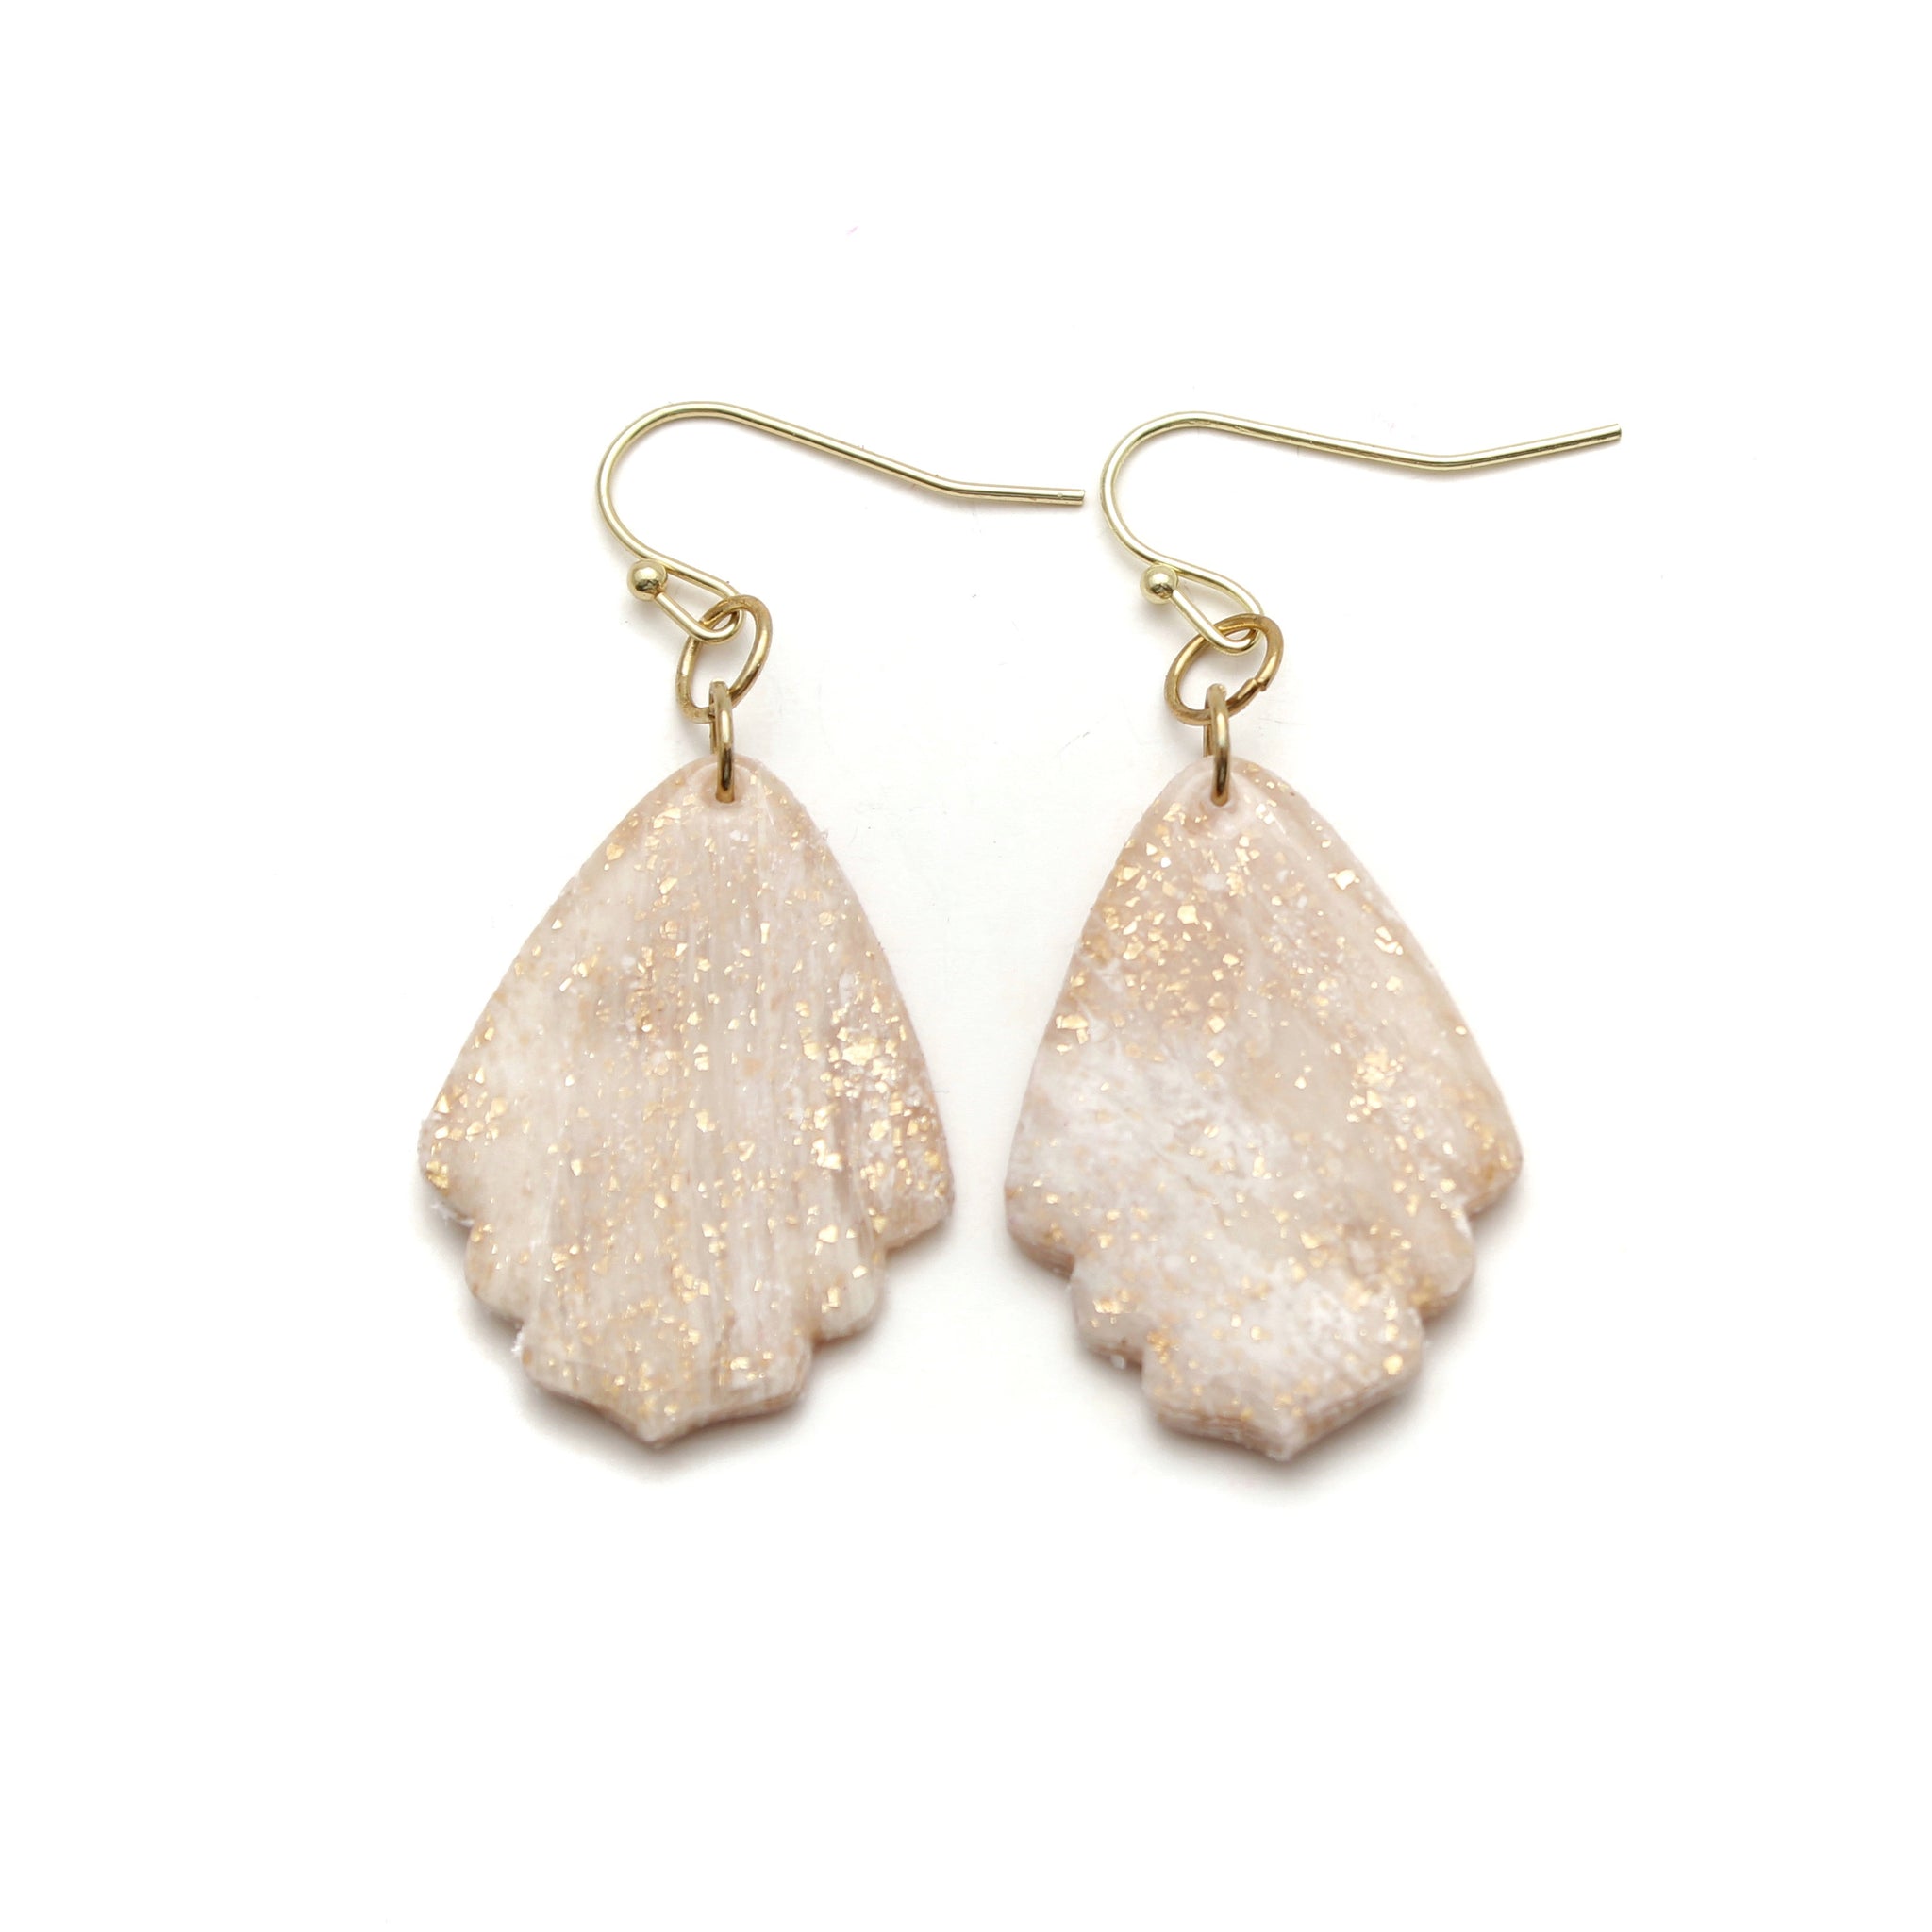 Ivory and Gold Frilly Dangle Earrings